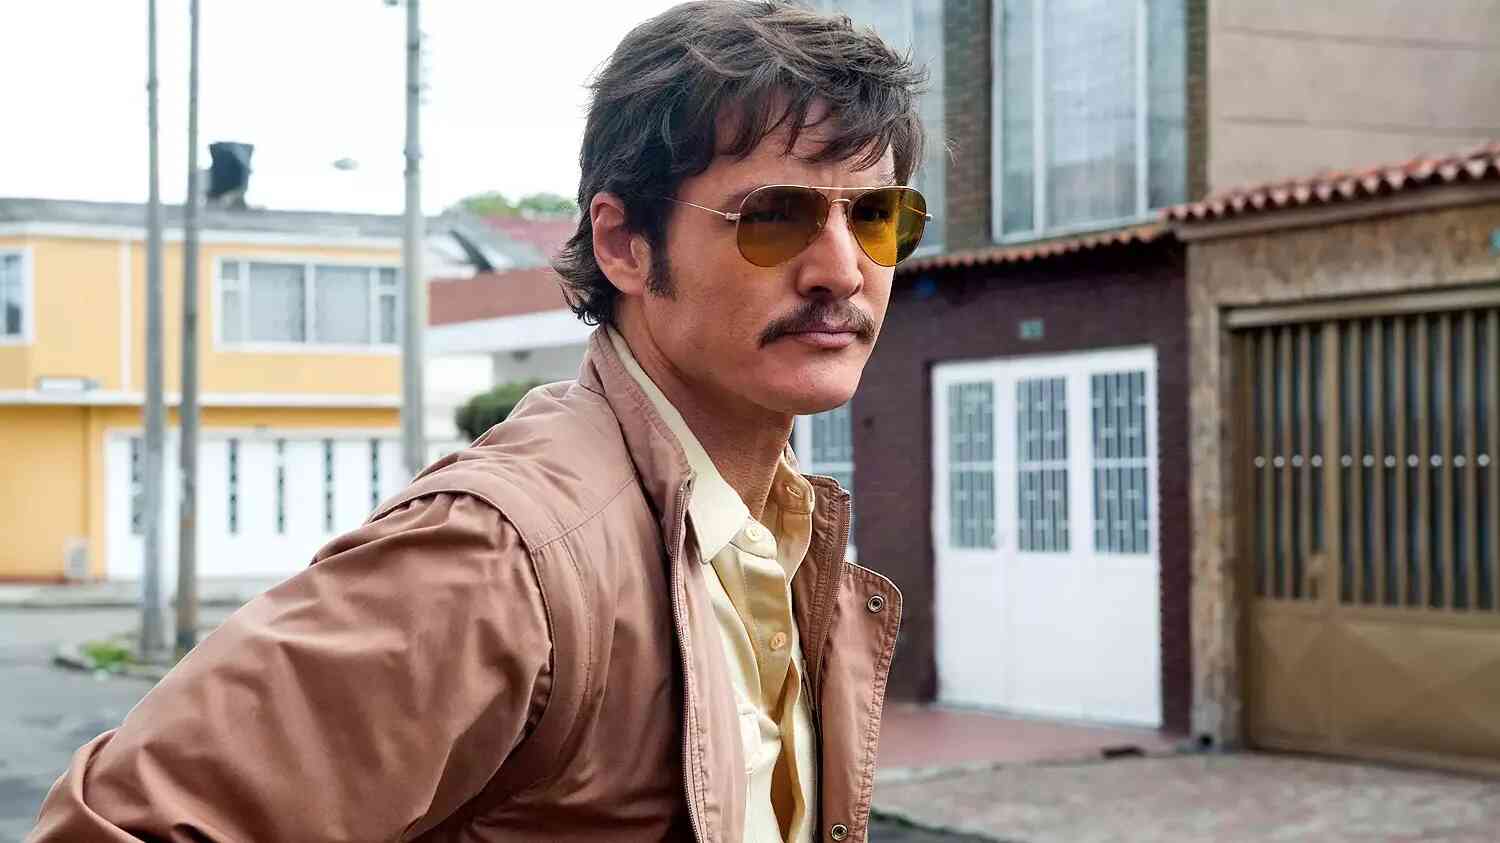 5 Things You Didn't Know About the Making of Narcos